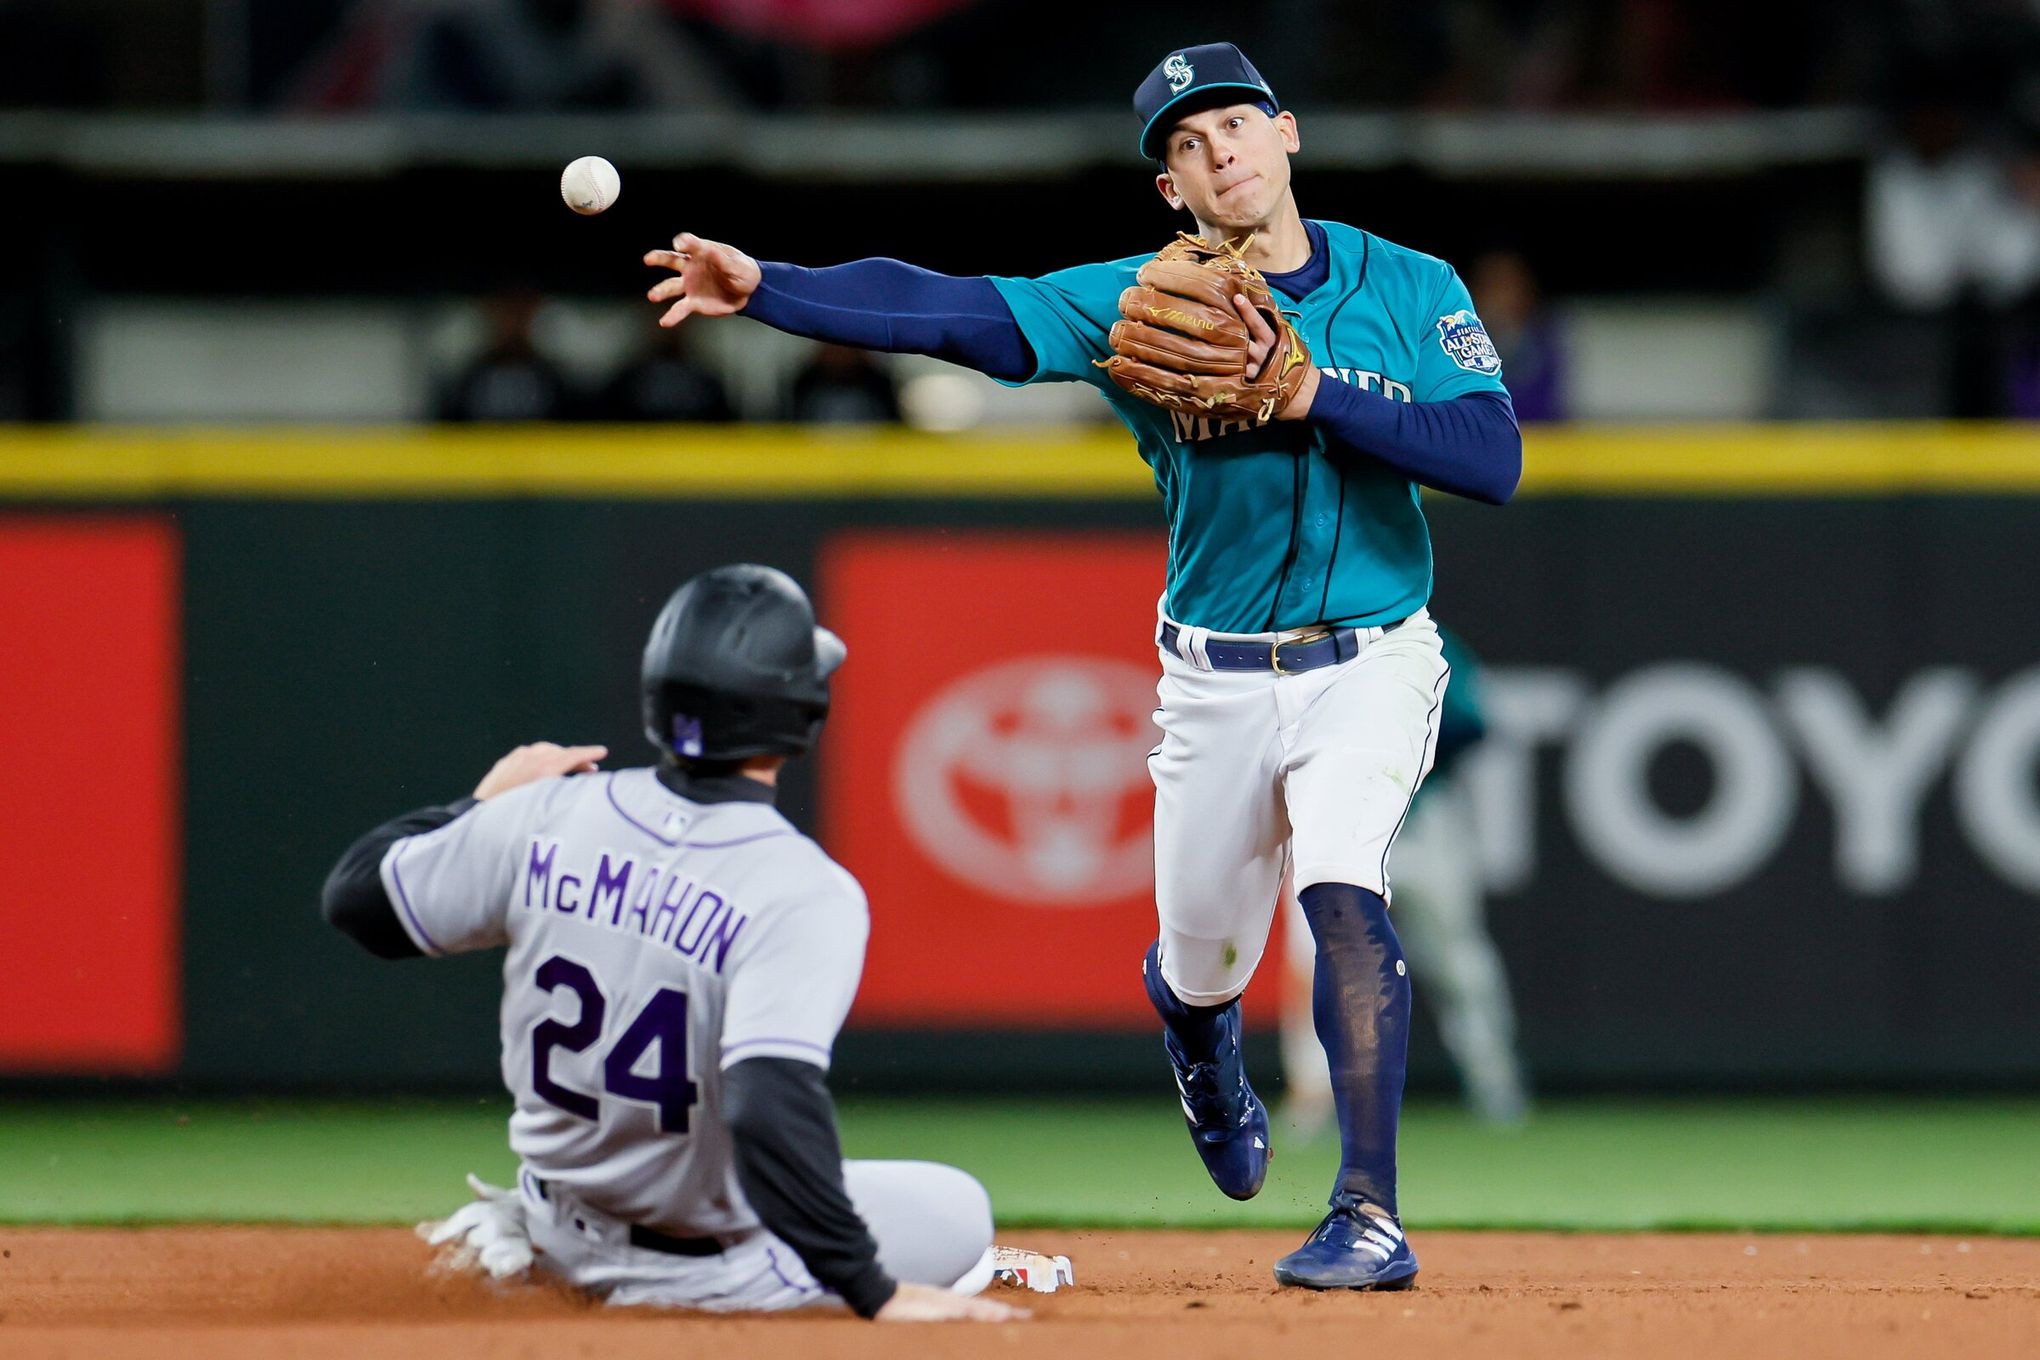 Sam Haggerty returns to Mariners as Cooper Hummel heads to Tacoma